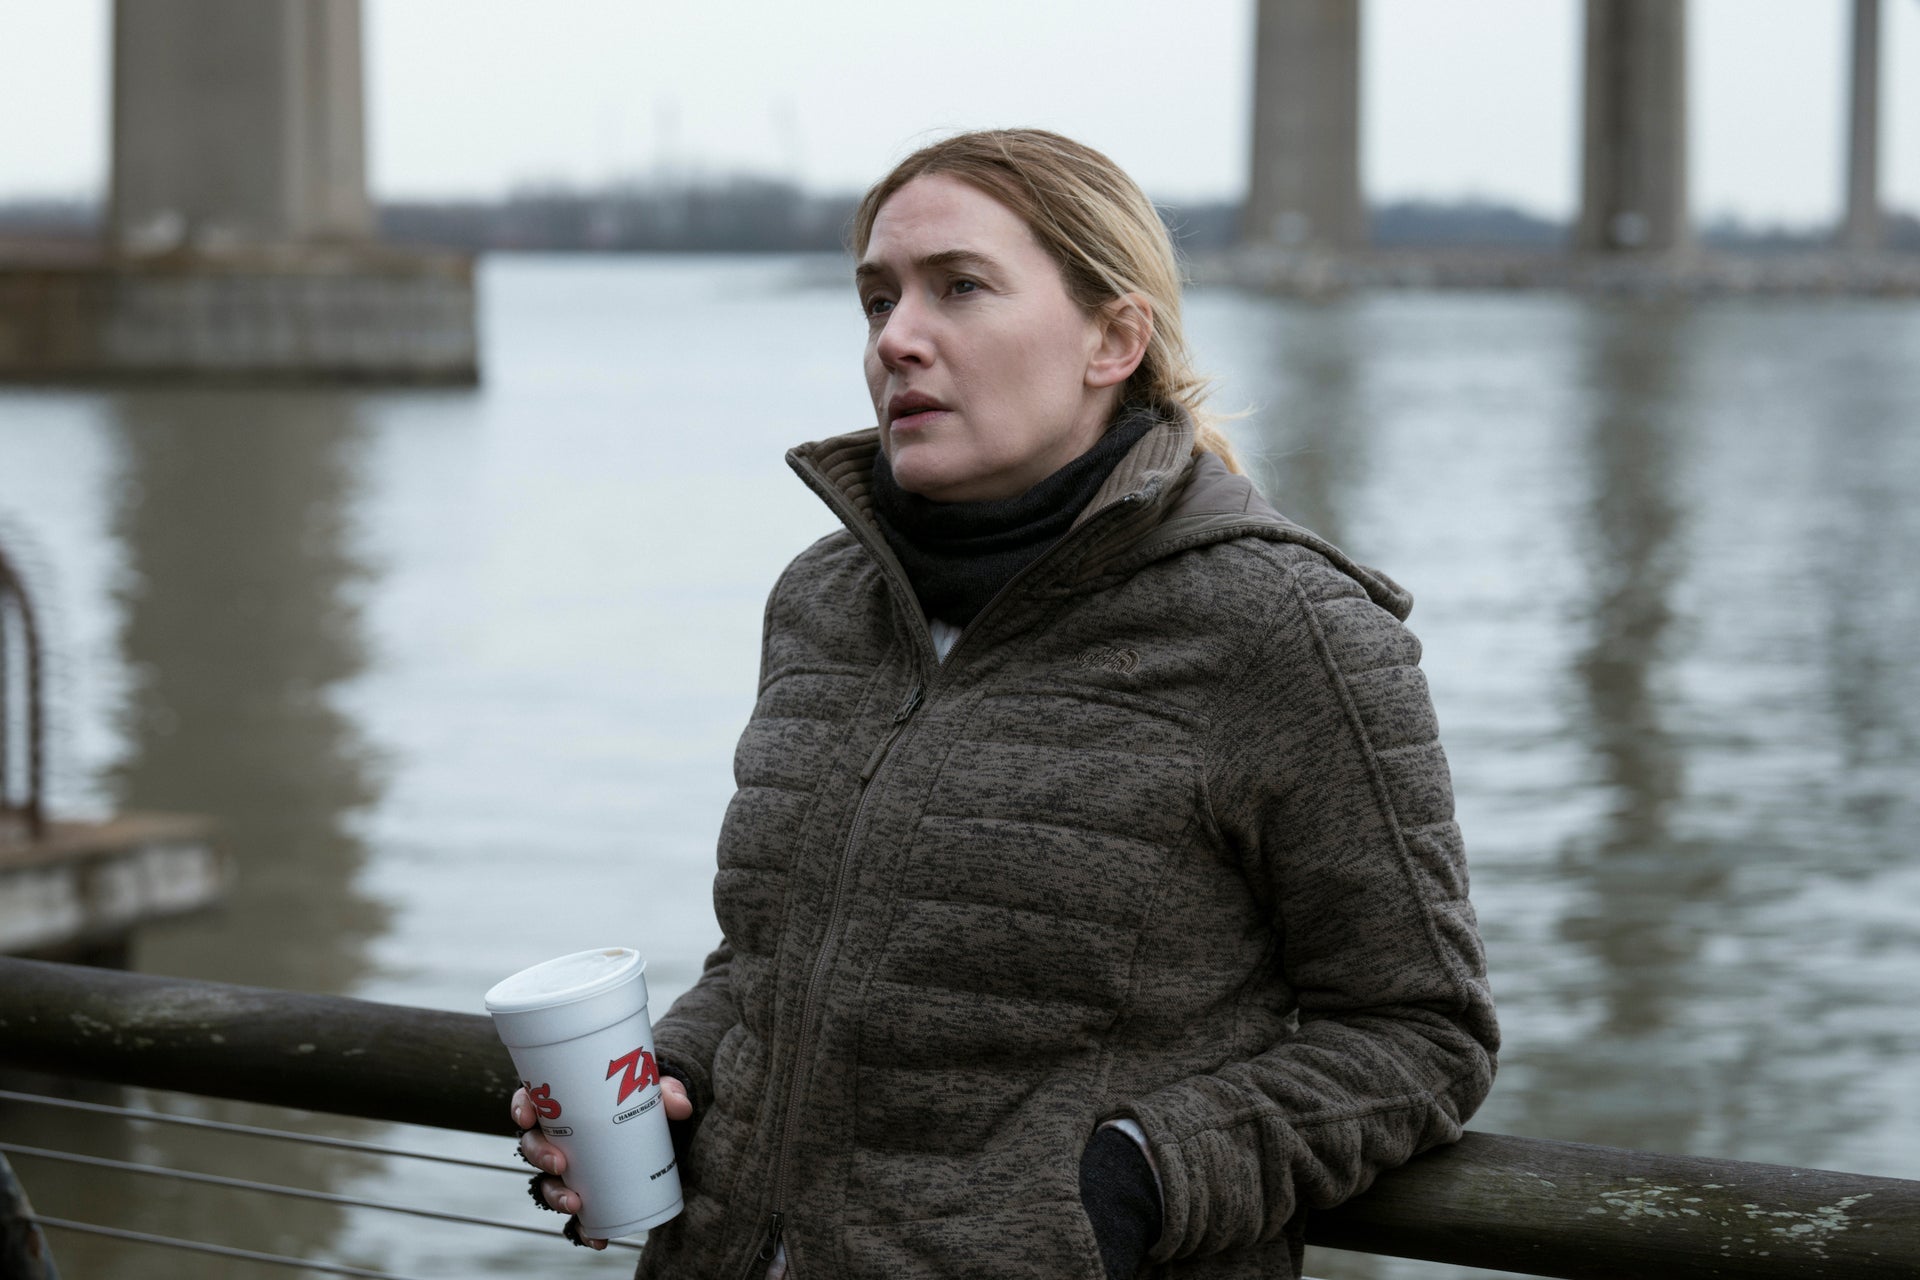 Kate Winslet as Mare looking pensive as she leans against a railing by the river. She is wearing a heavy coat and holding a takeout soda cup.